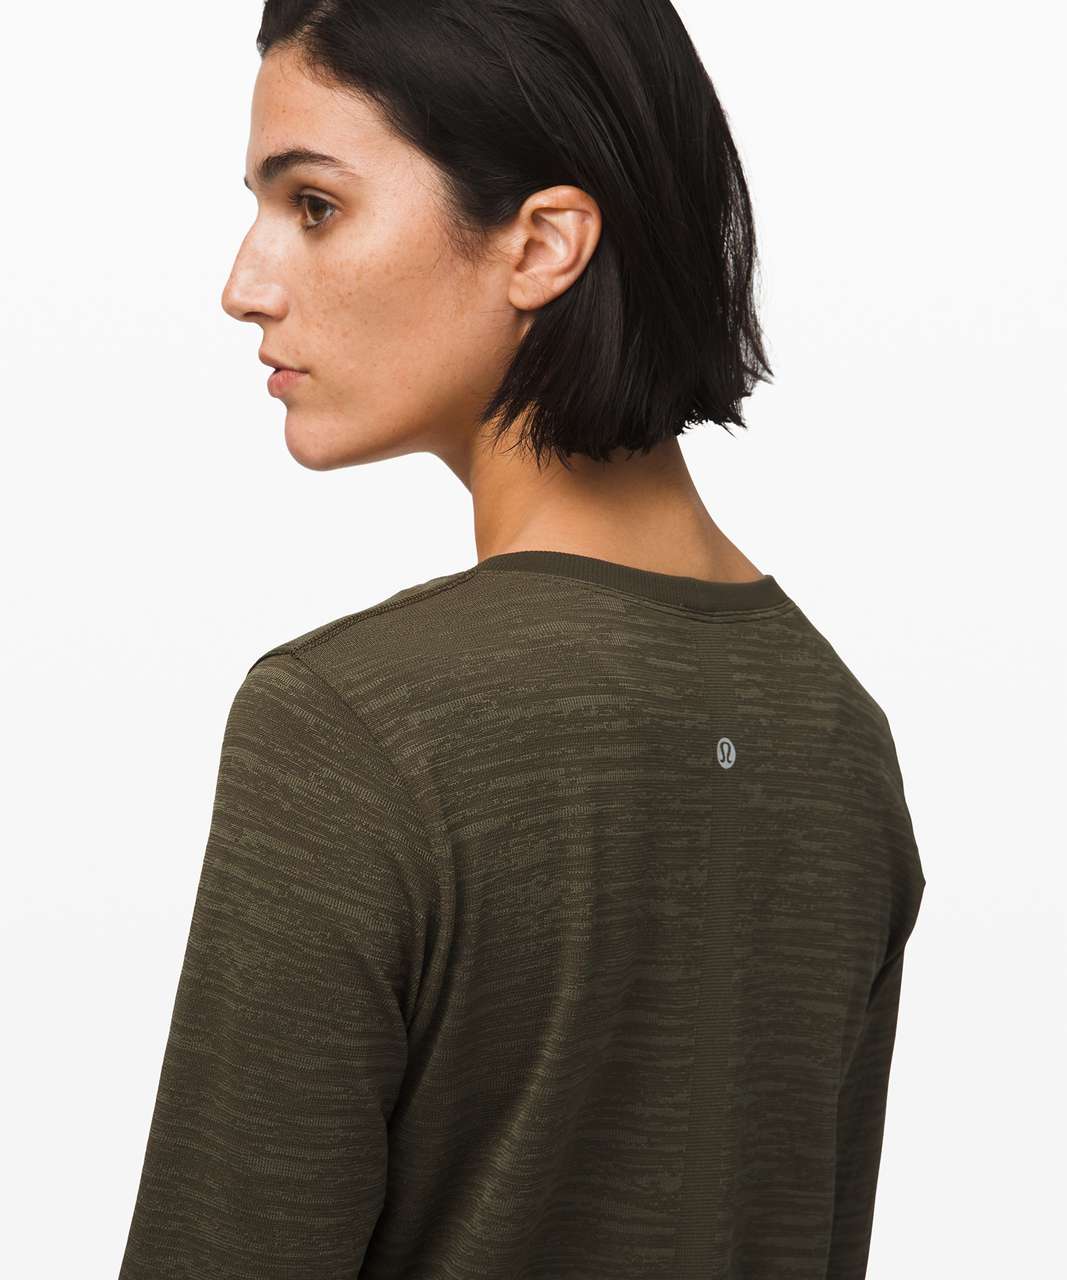 Lululemon Swiftly Relaxed Long Sleeve - Dark Olive / Fatigue Green